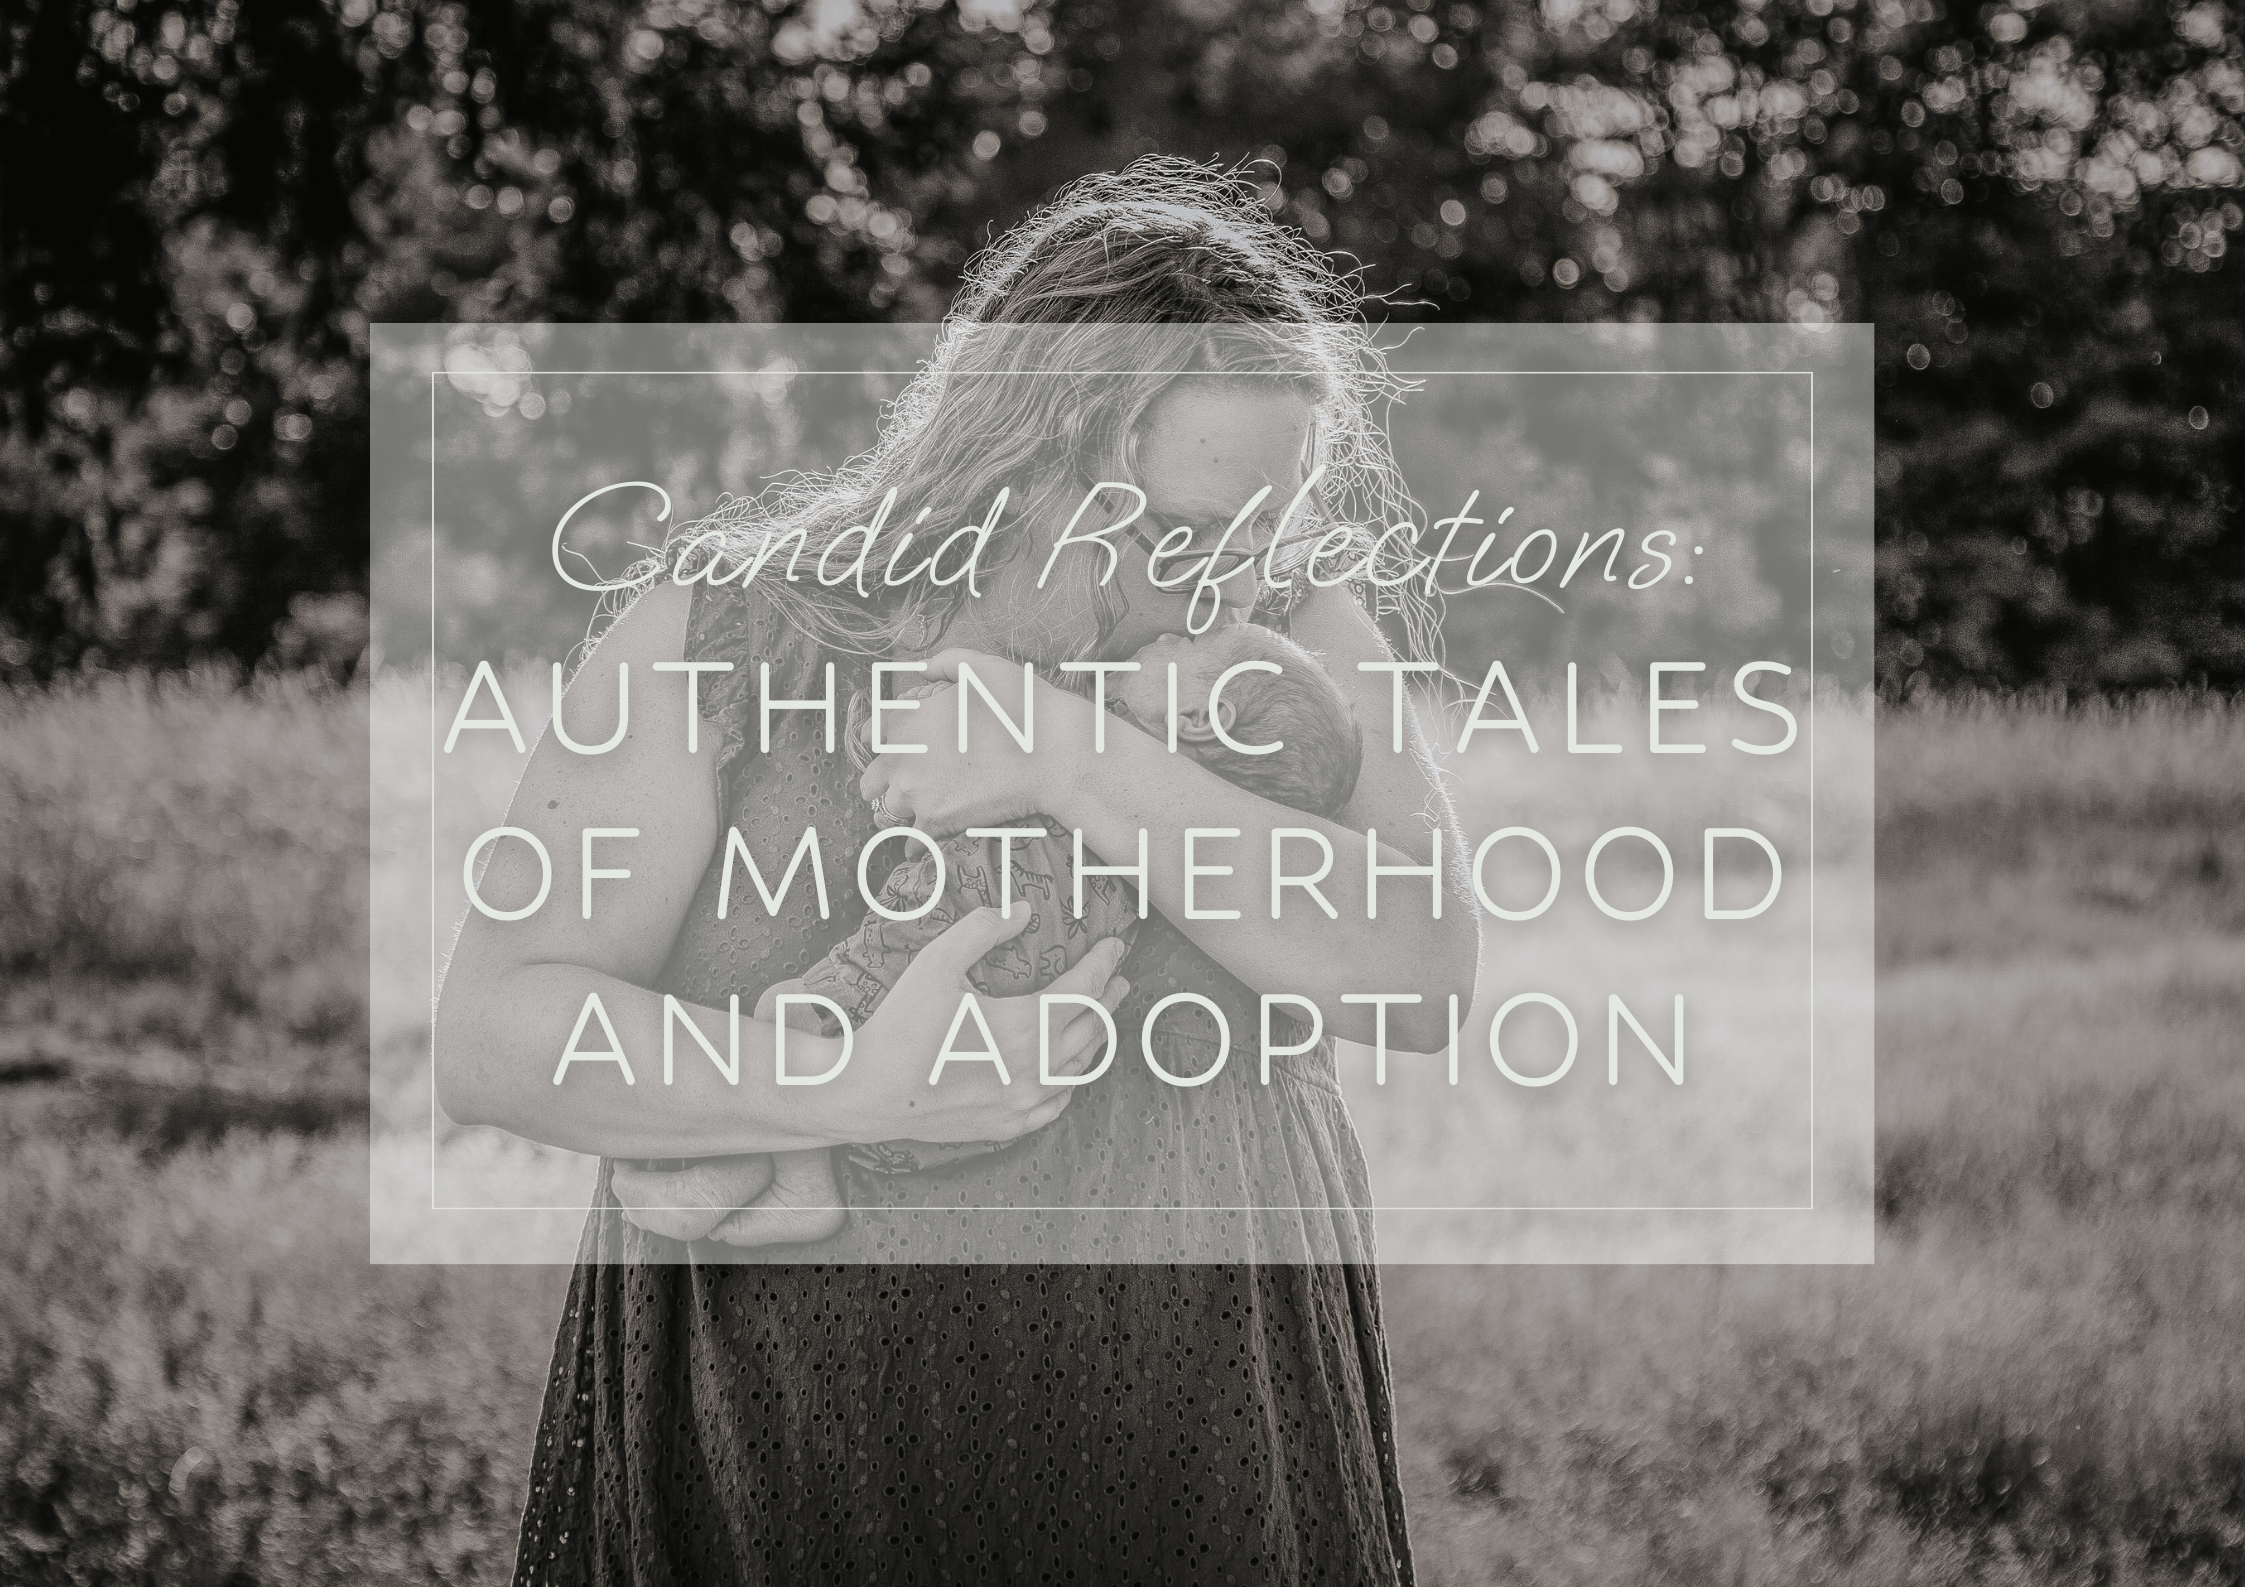 Candid Reflections: Authentic Tales of Motherhood and Adoption